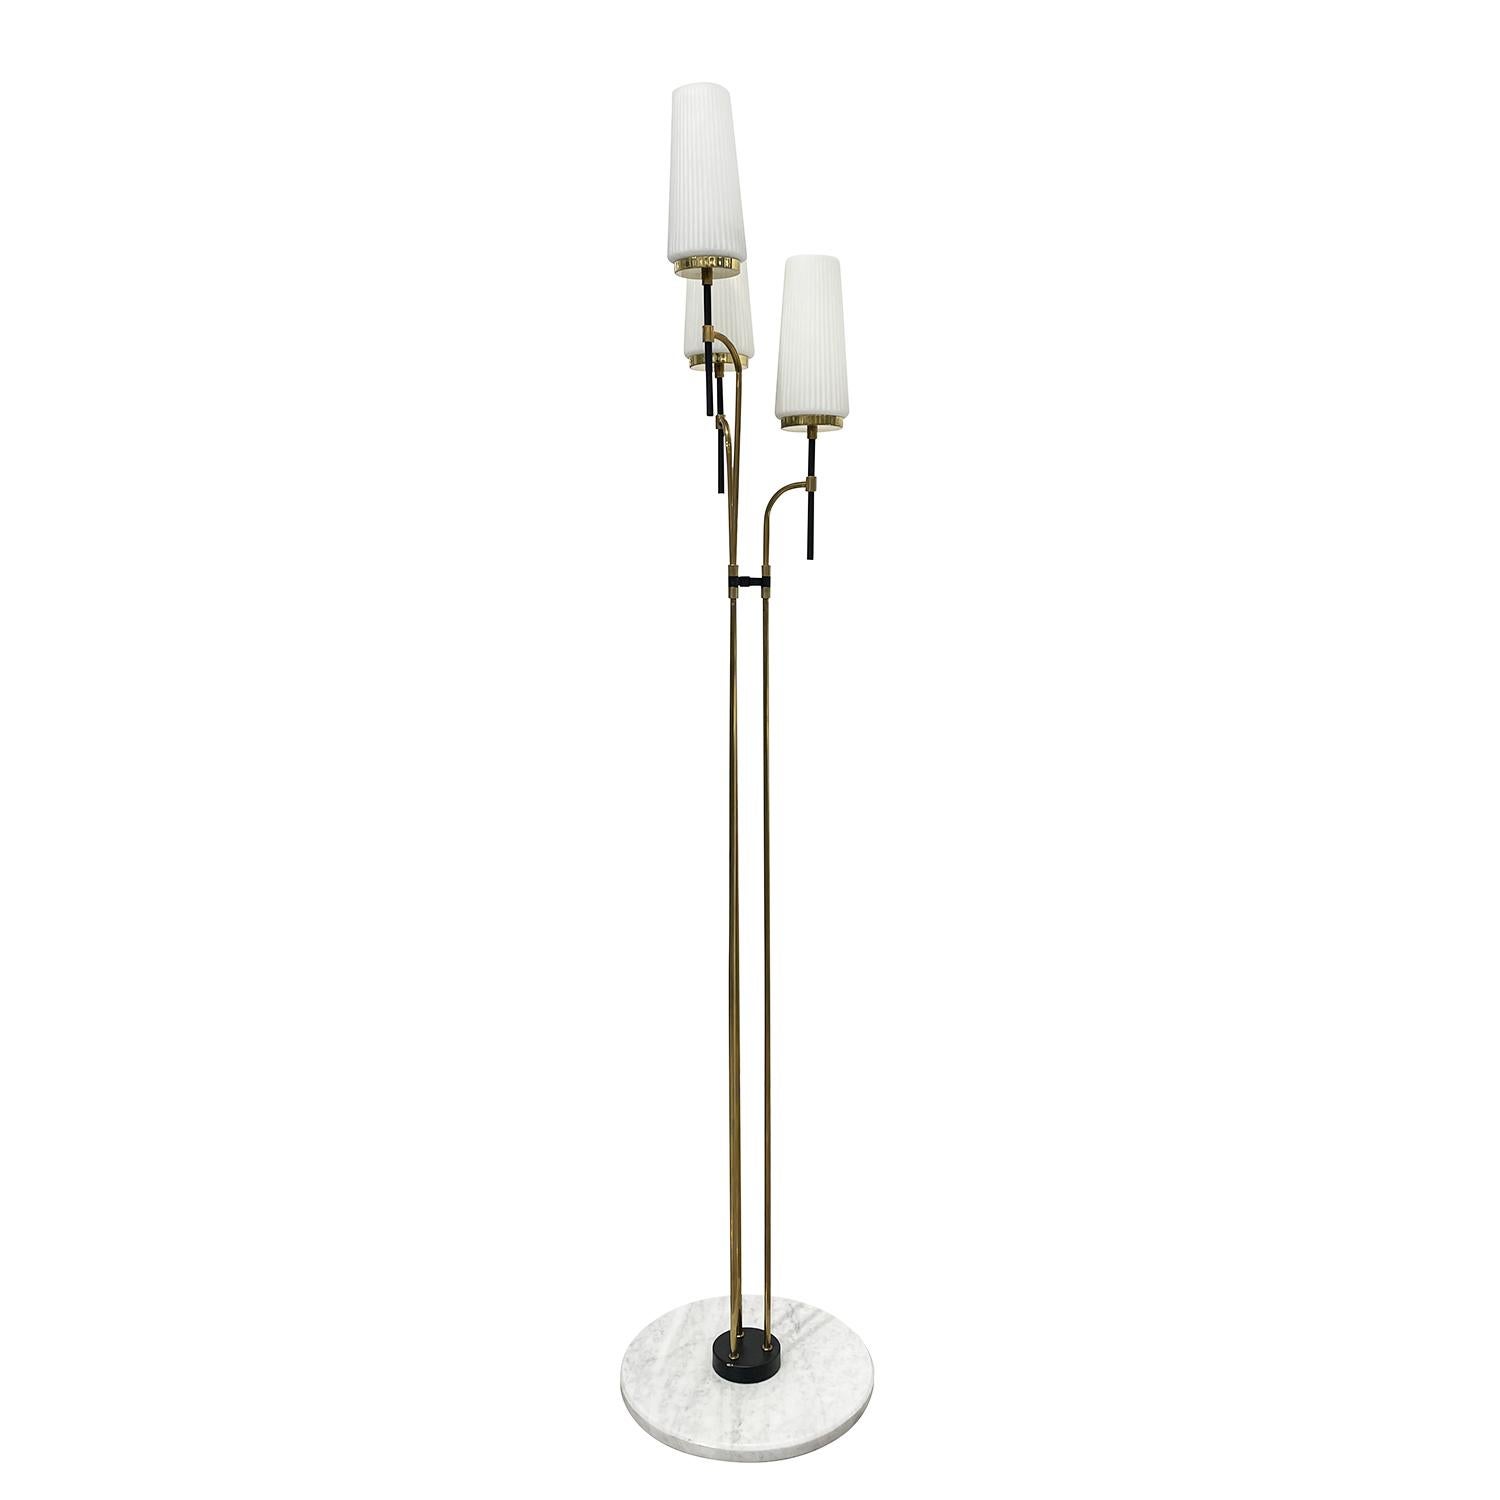 A gold, vintage Mid-Century Modern Italian floor lamp made of handcrafted metal and polished brass attributed to Stilnovo, in good condition. The detailed light is composed with three round cylindrical, frosted opaline glass shades, each of the